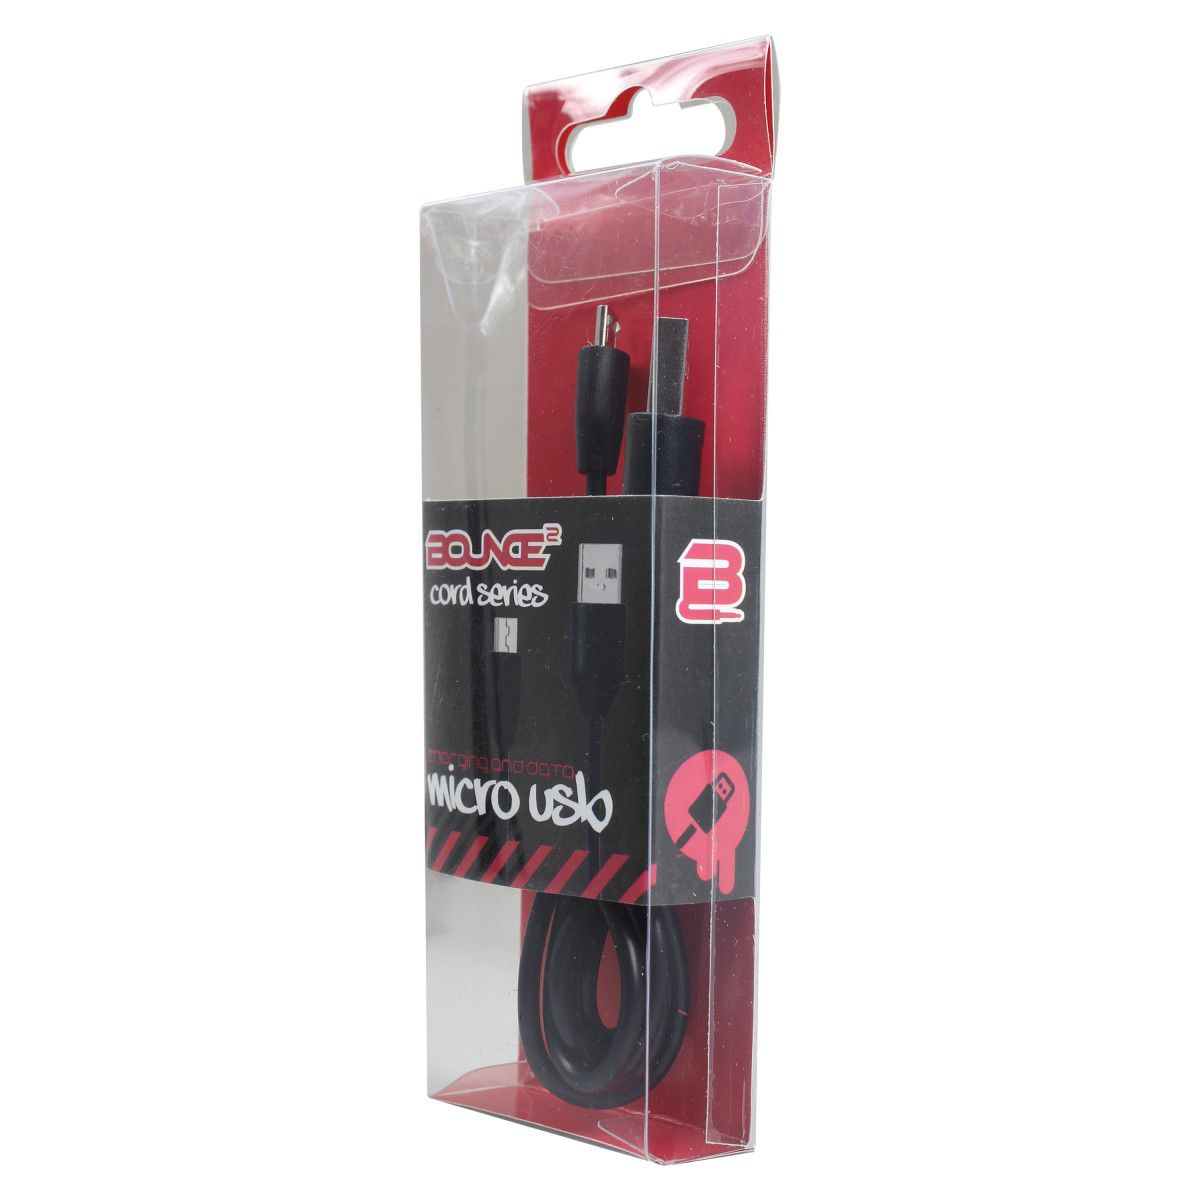 Bounce Cord Series 1.2m Micro USB cable - Black